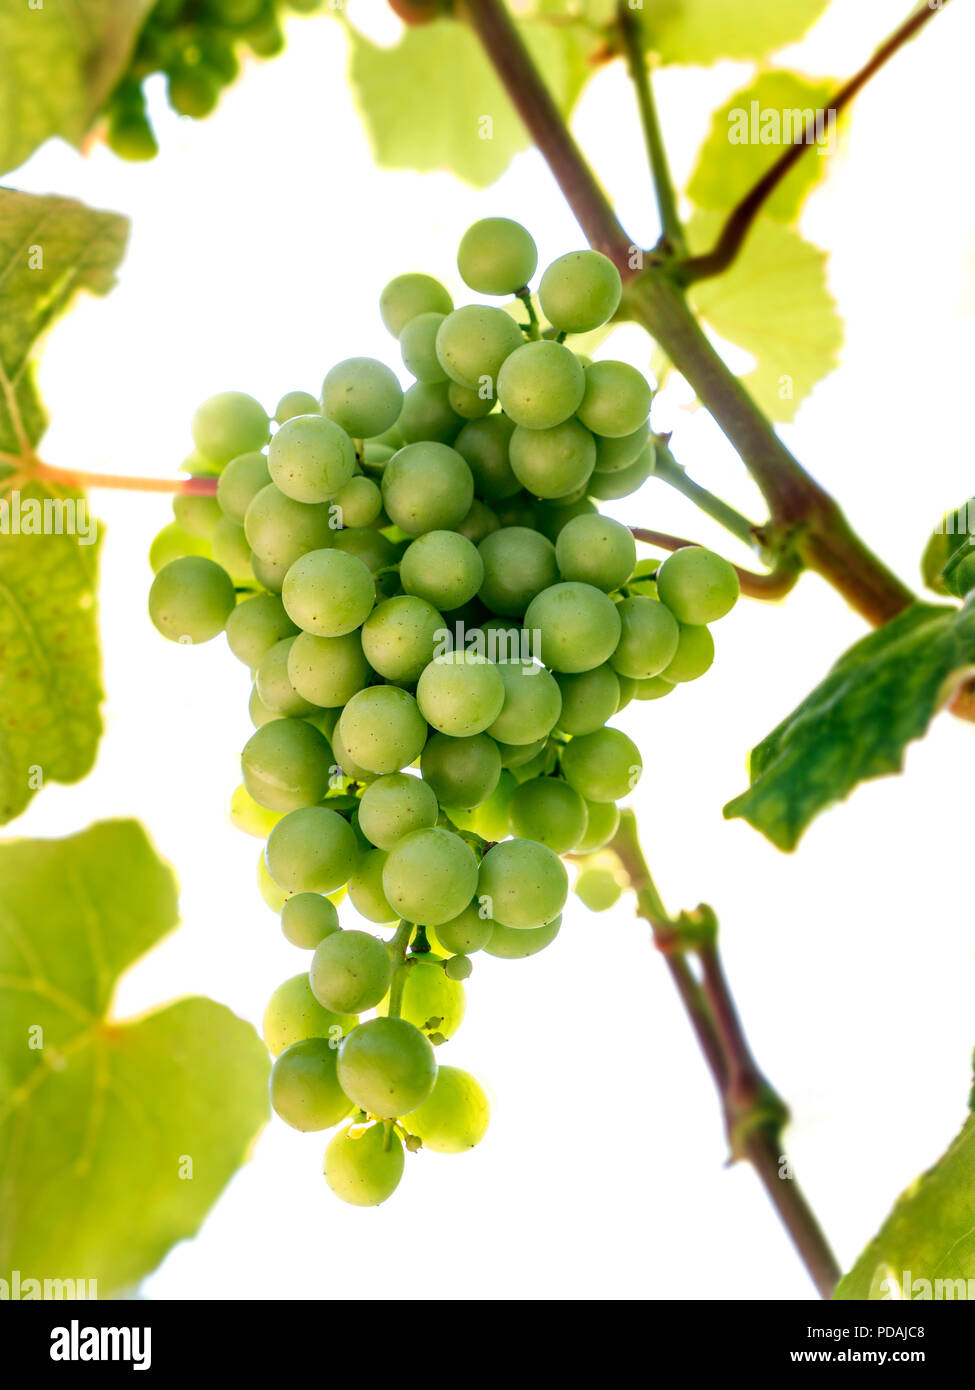 Fragola / Isabella variety grapes low angle view ripening on vine, sweet dessert strawberry like grape, produces Fragolino Italian Sparkling Wine Stock Photo